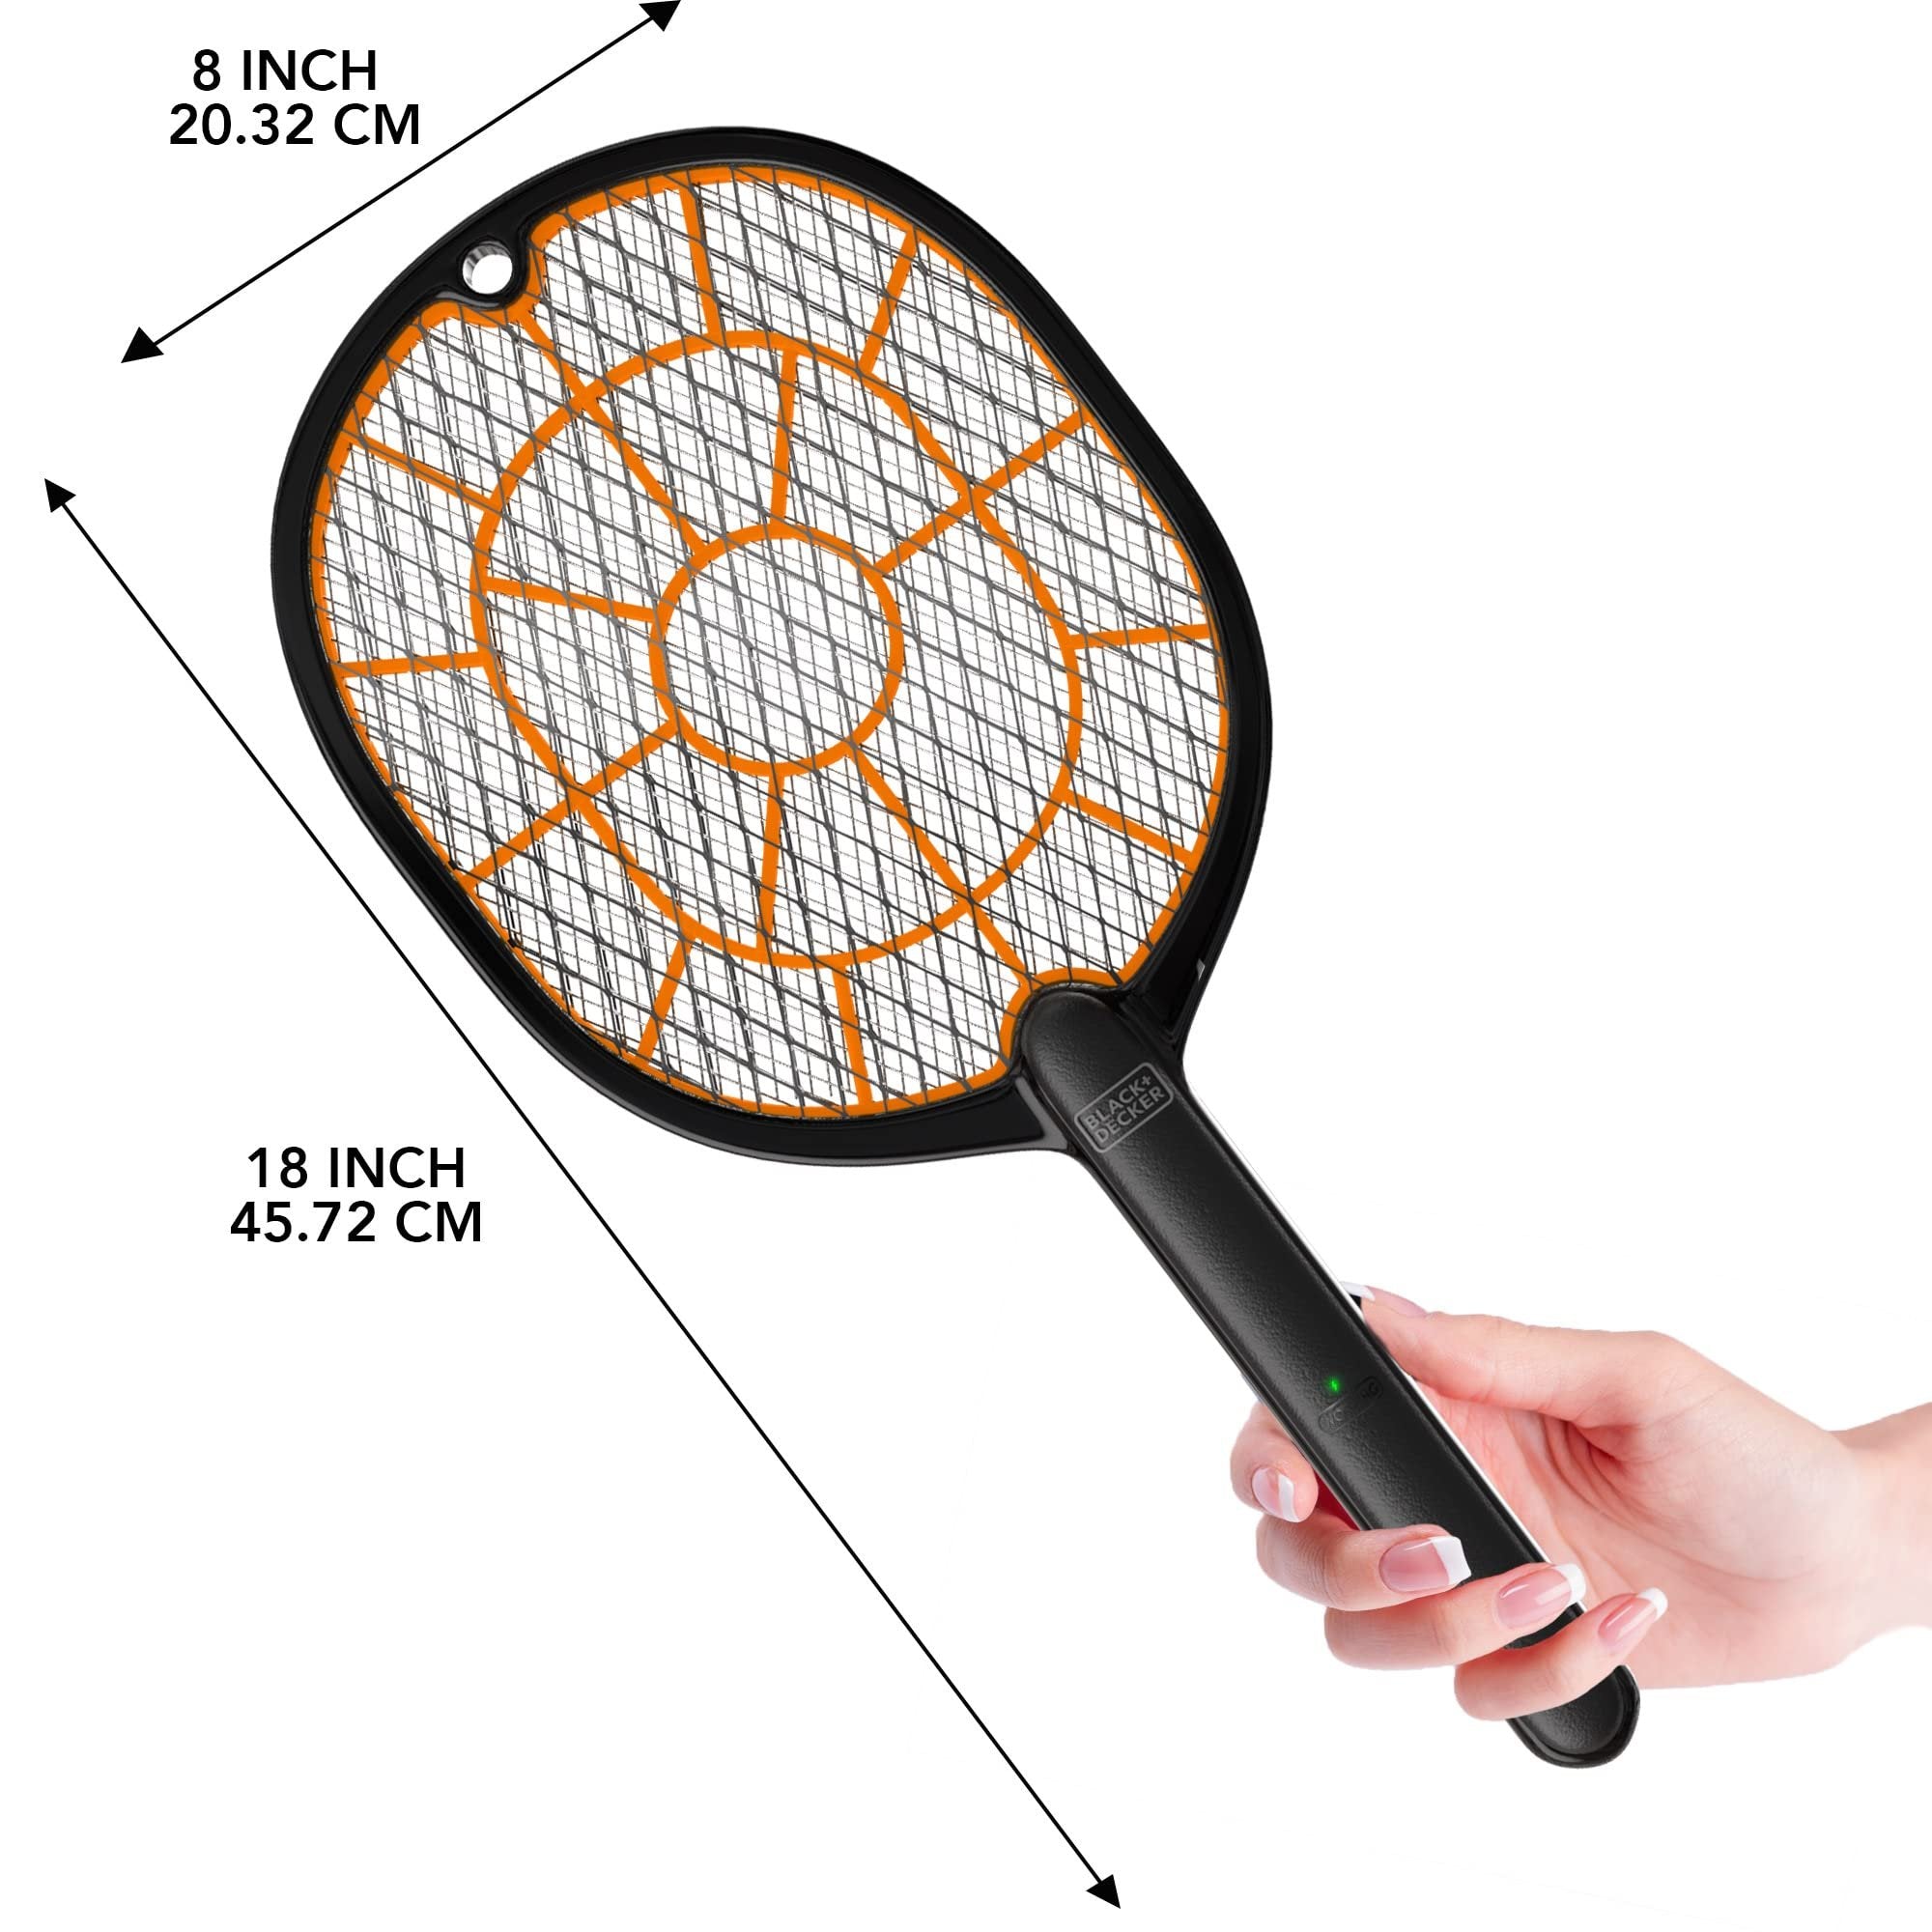 BLACK+DECKER Bug Zapper Racket - Handheld Electric Fly Swatter - Battery Operated - Harmless-to-Humans - Indoor/Outdoor - Black - Size: 1 Count